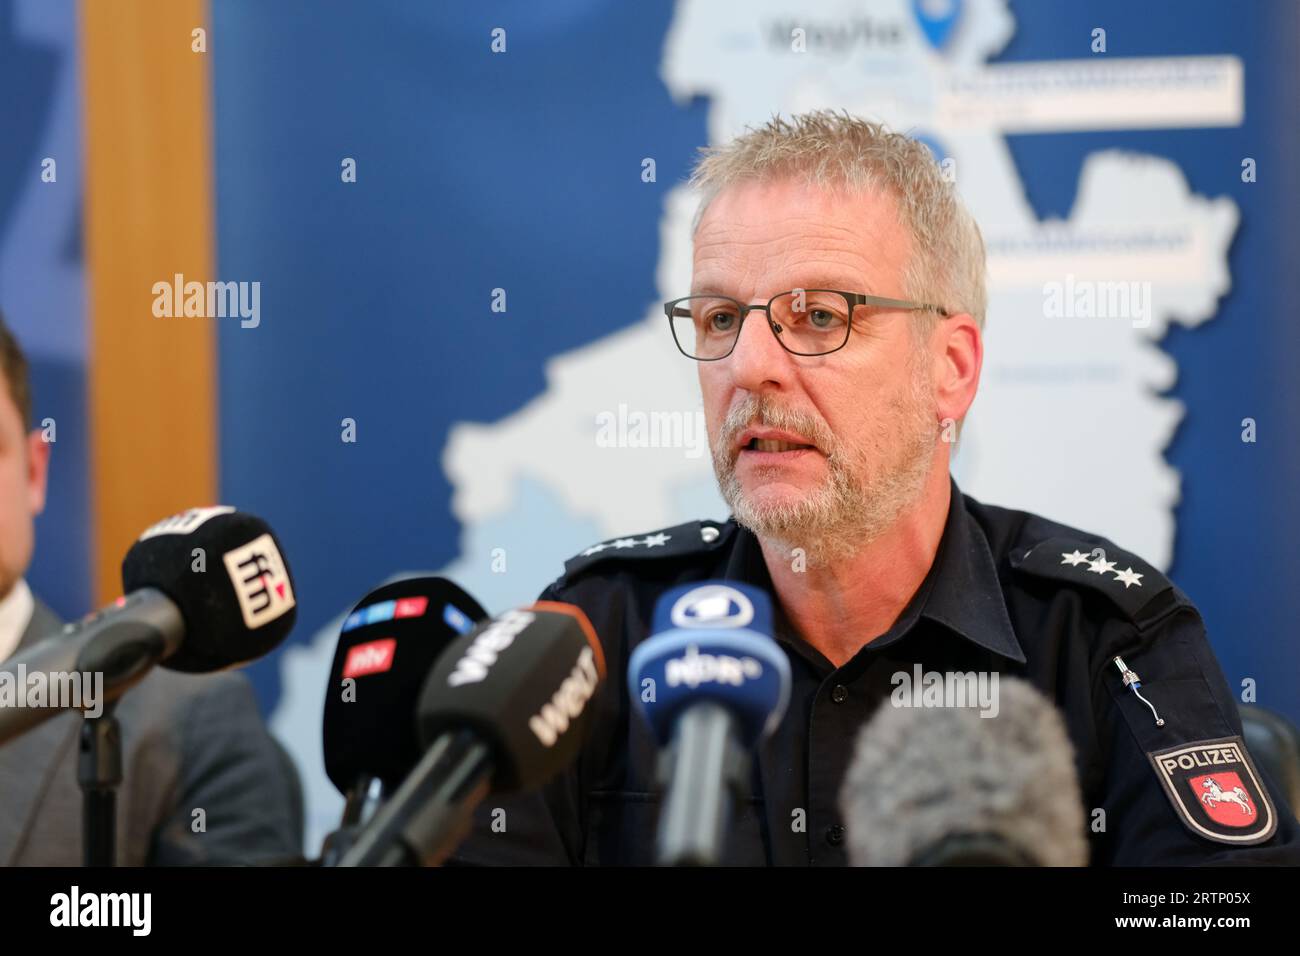 Twistringen, Germany. 14th Sep, 2023. Thomas Gissing, press spokesman for the Diepholz Police Inspectorate, speaks at a press conference at the town hall in Twistringen. After the death of a 17-year-old inline skater and an attack on a 30-year-old woman in the Diepholz district of Lower Saxony, there are still no clues to the background or a motive for the crime, according to the public prosecutor's office. A 42-year-old German suspect was caught on Wednesday evening. Credit: Markus Hibbeler/dpa/Alamy Live News Stock Photo